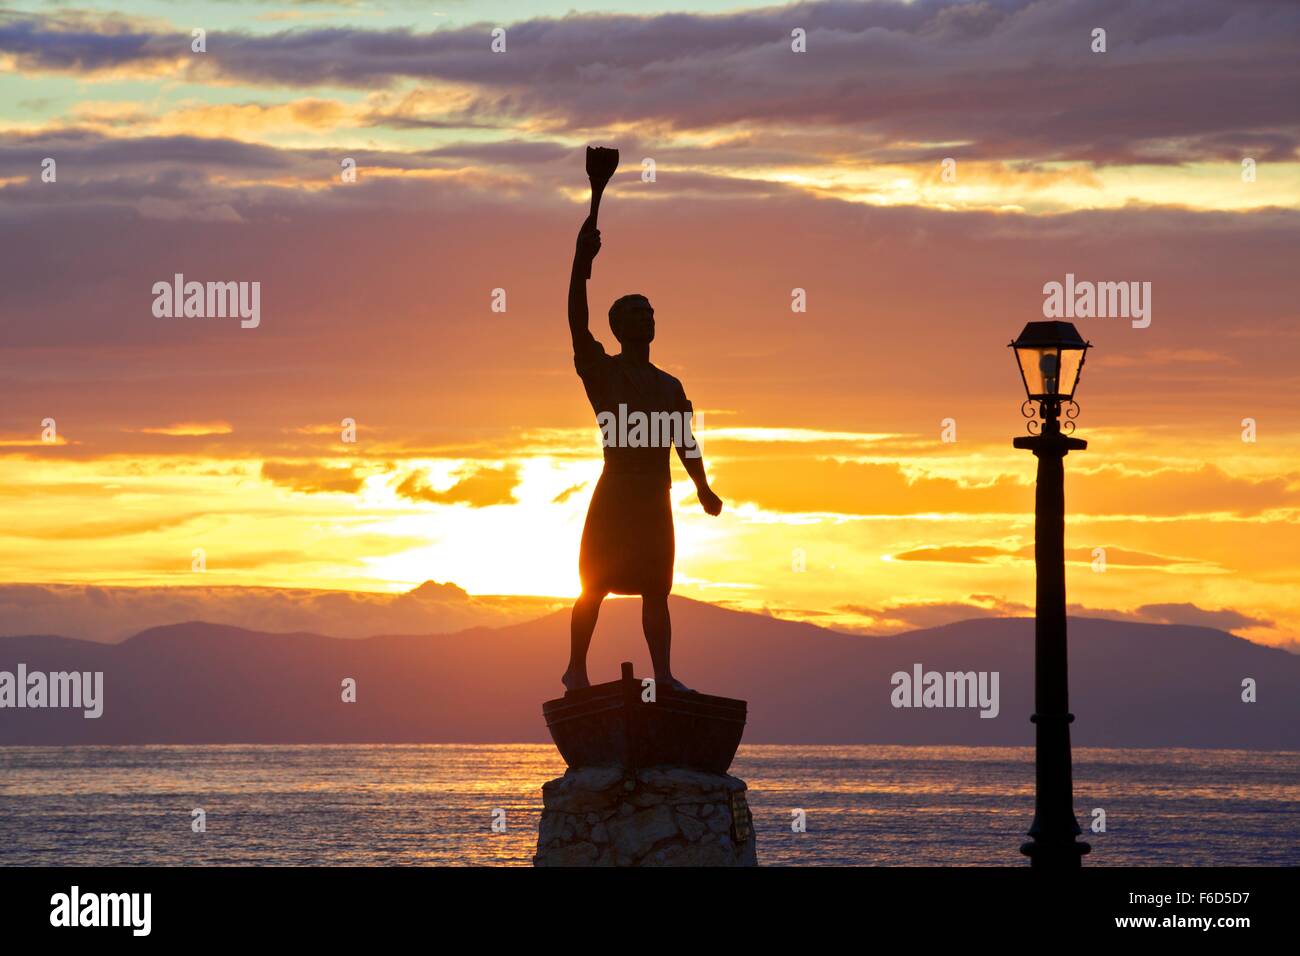 Statue of Giorgos Anemogiannis at The Harbour Entrance, Gaios Harbour, Paxos, The Ionian Islands, Greek Islands, Greece, Europe Stock Photo